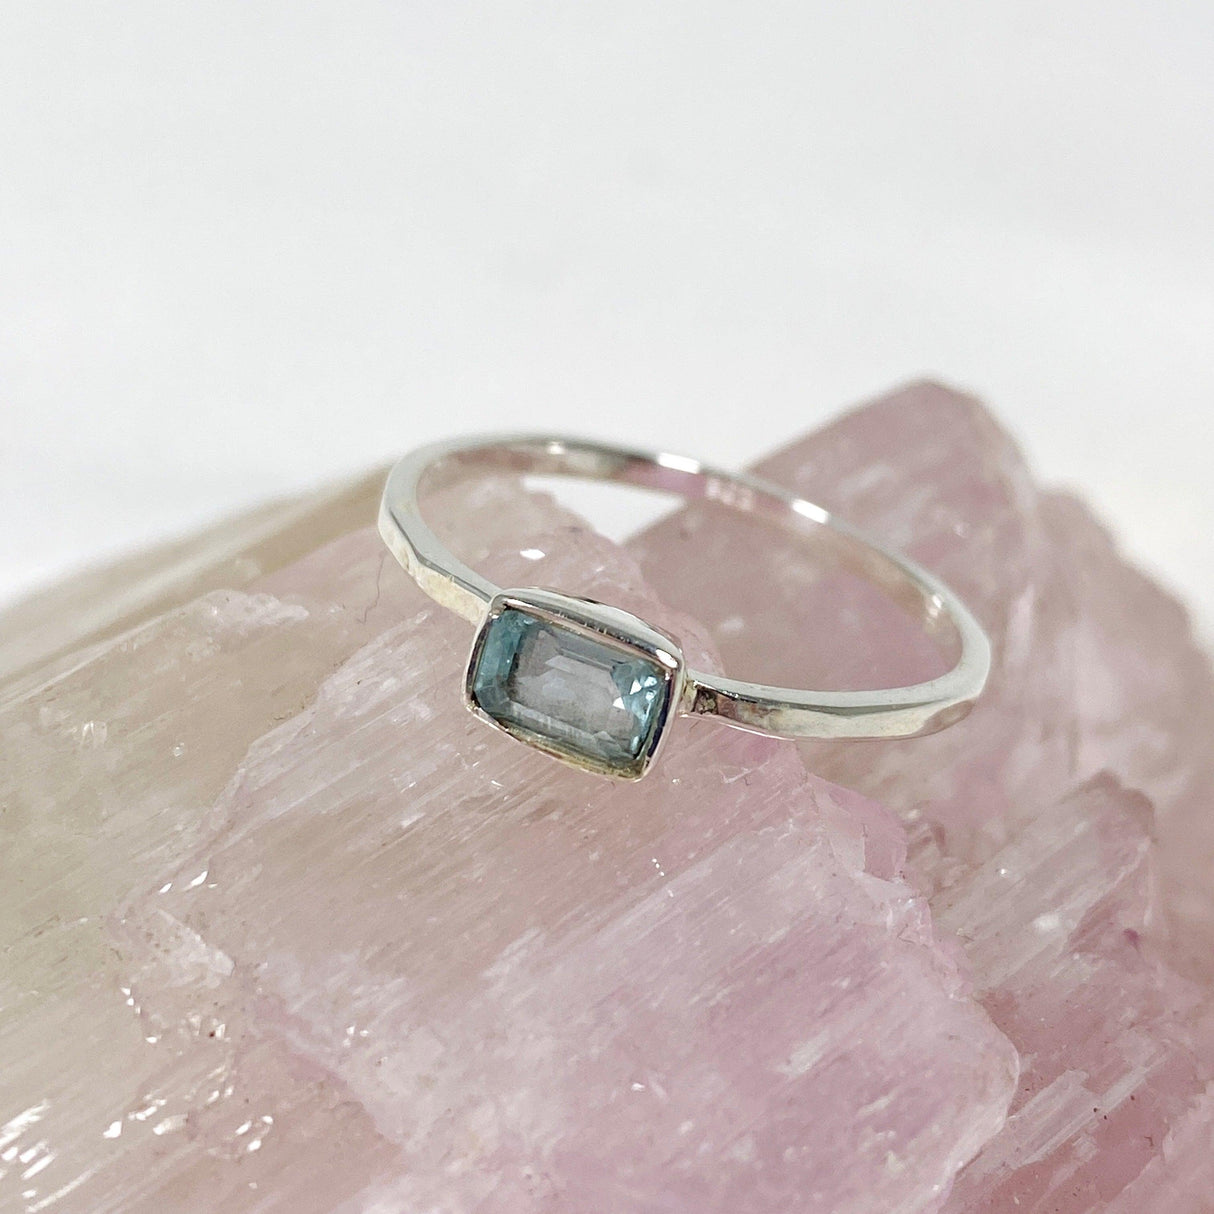 Blue Topaz Rectangular Faceted Fine Band Ring R3793-BTO - Nature's Magick